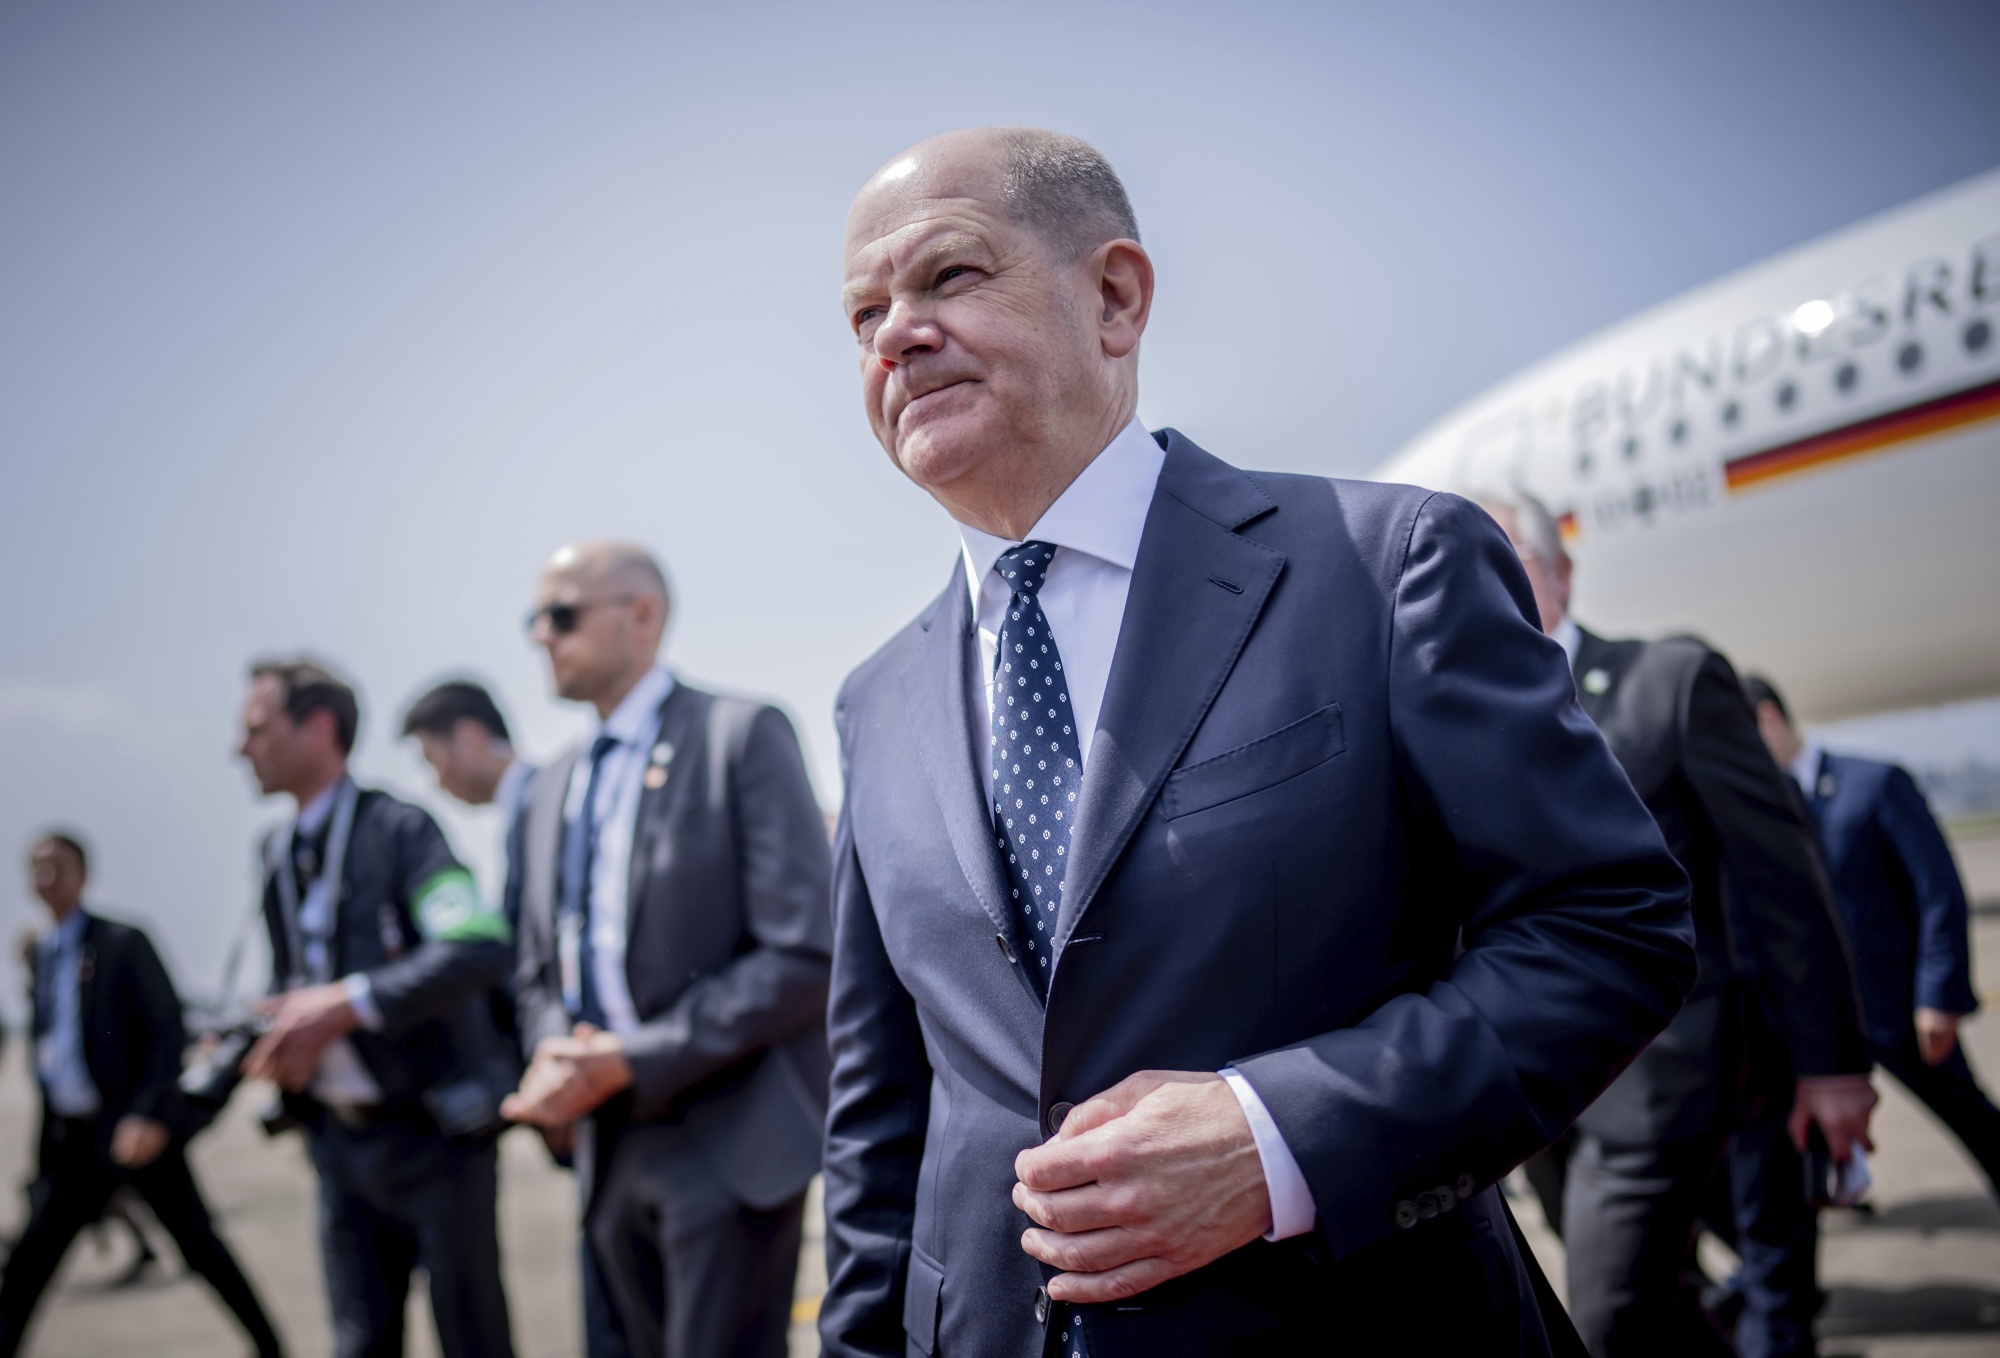 The German Chancellor, Olaf Scholz, visits China and is received by municipal officials